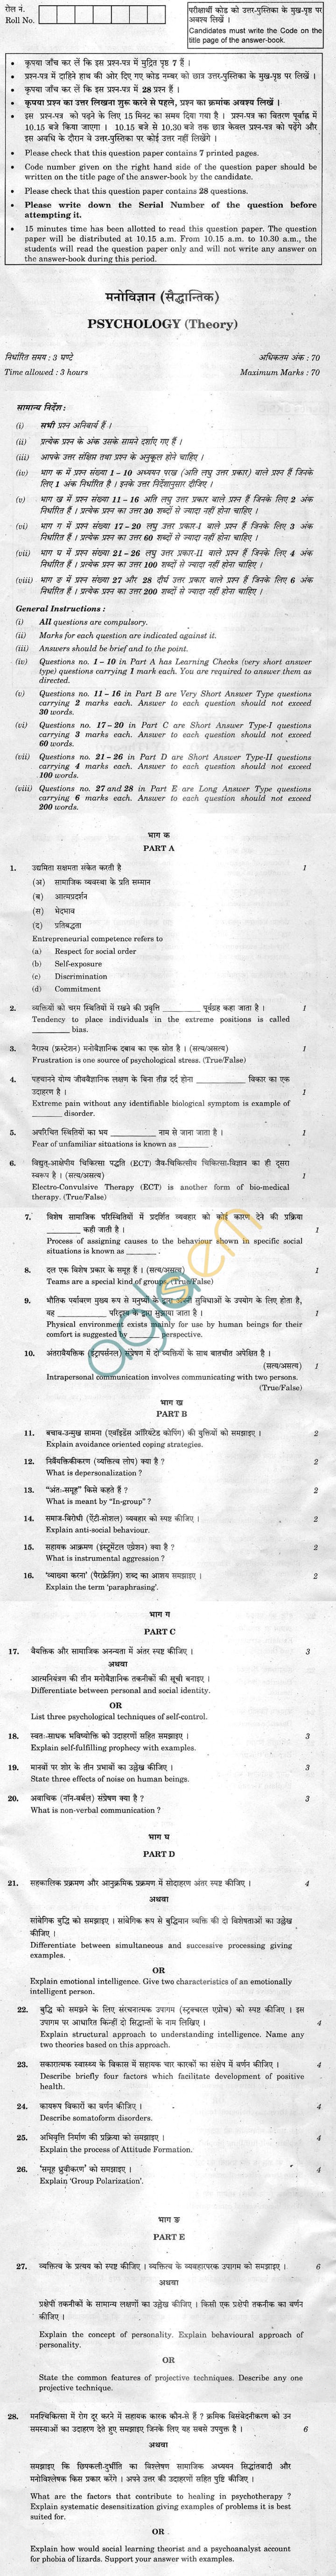 CBSE Compartment Exam 2013 Class XII Question Paper - Psychology